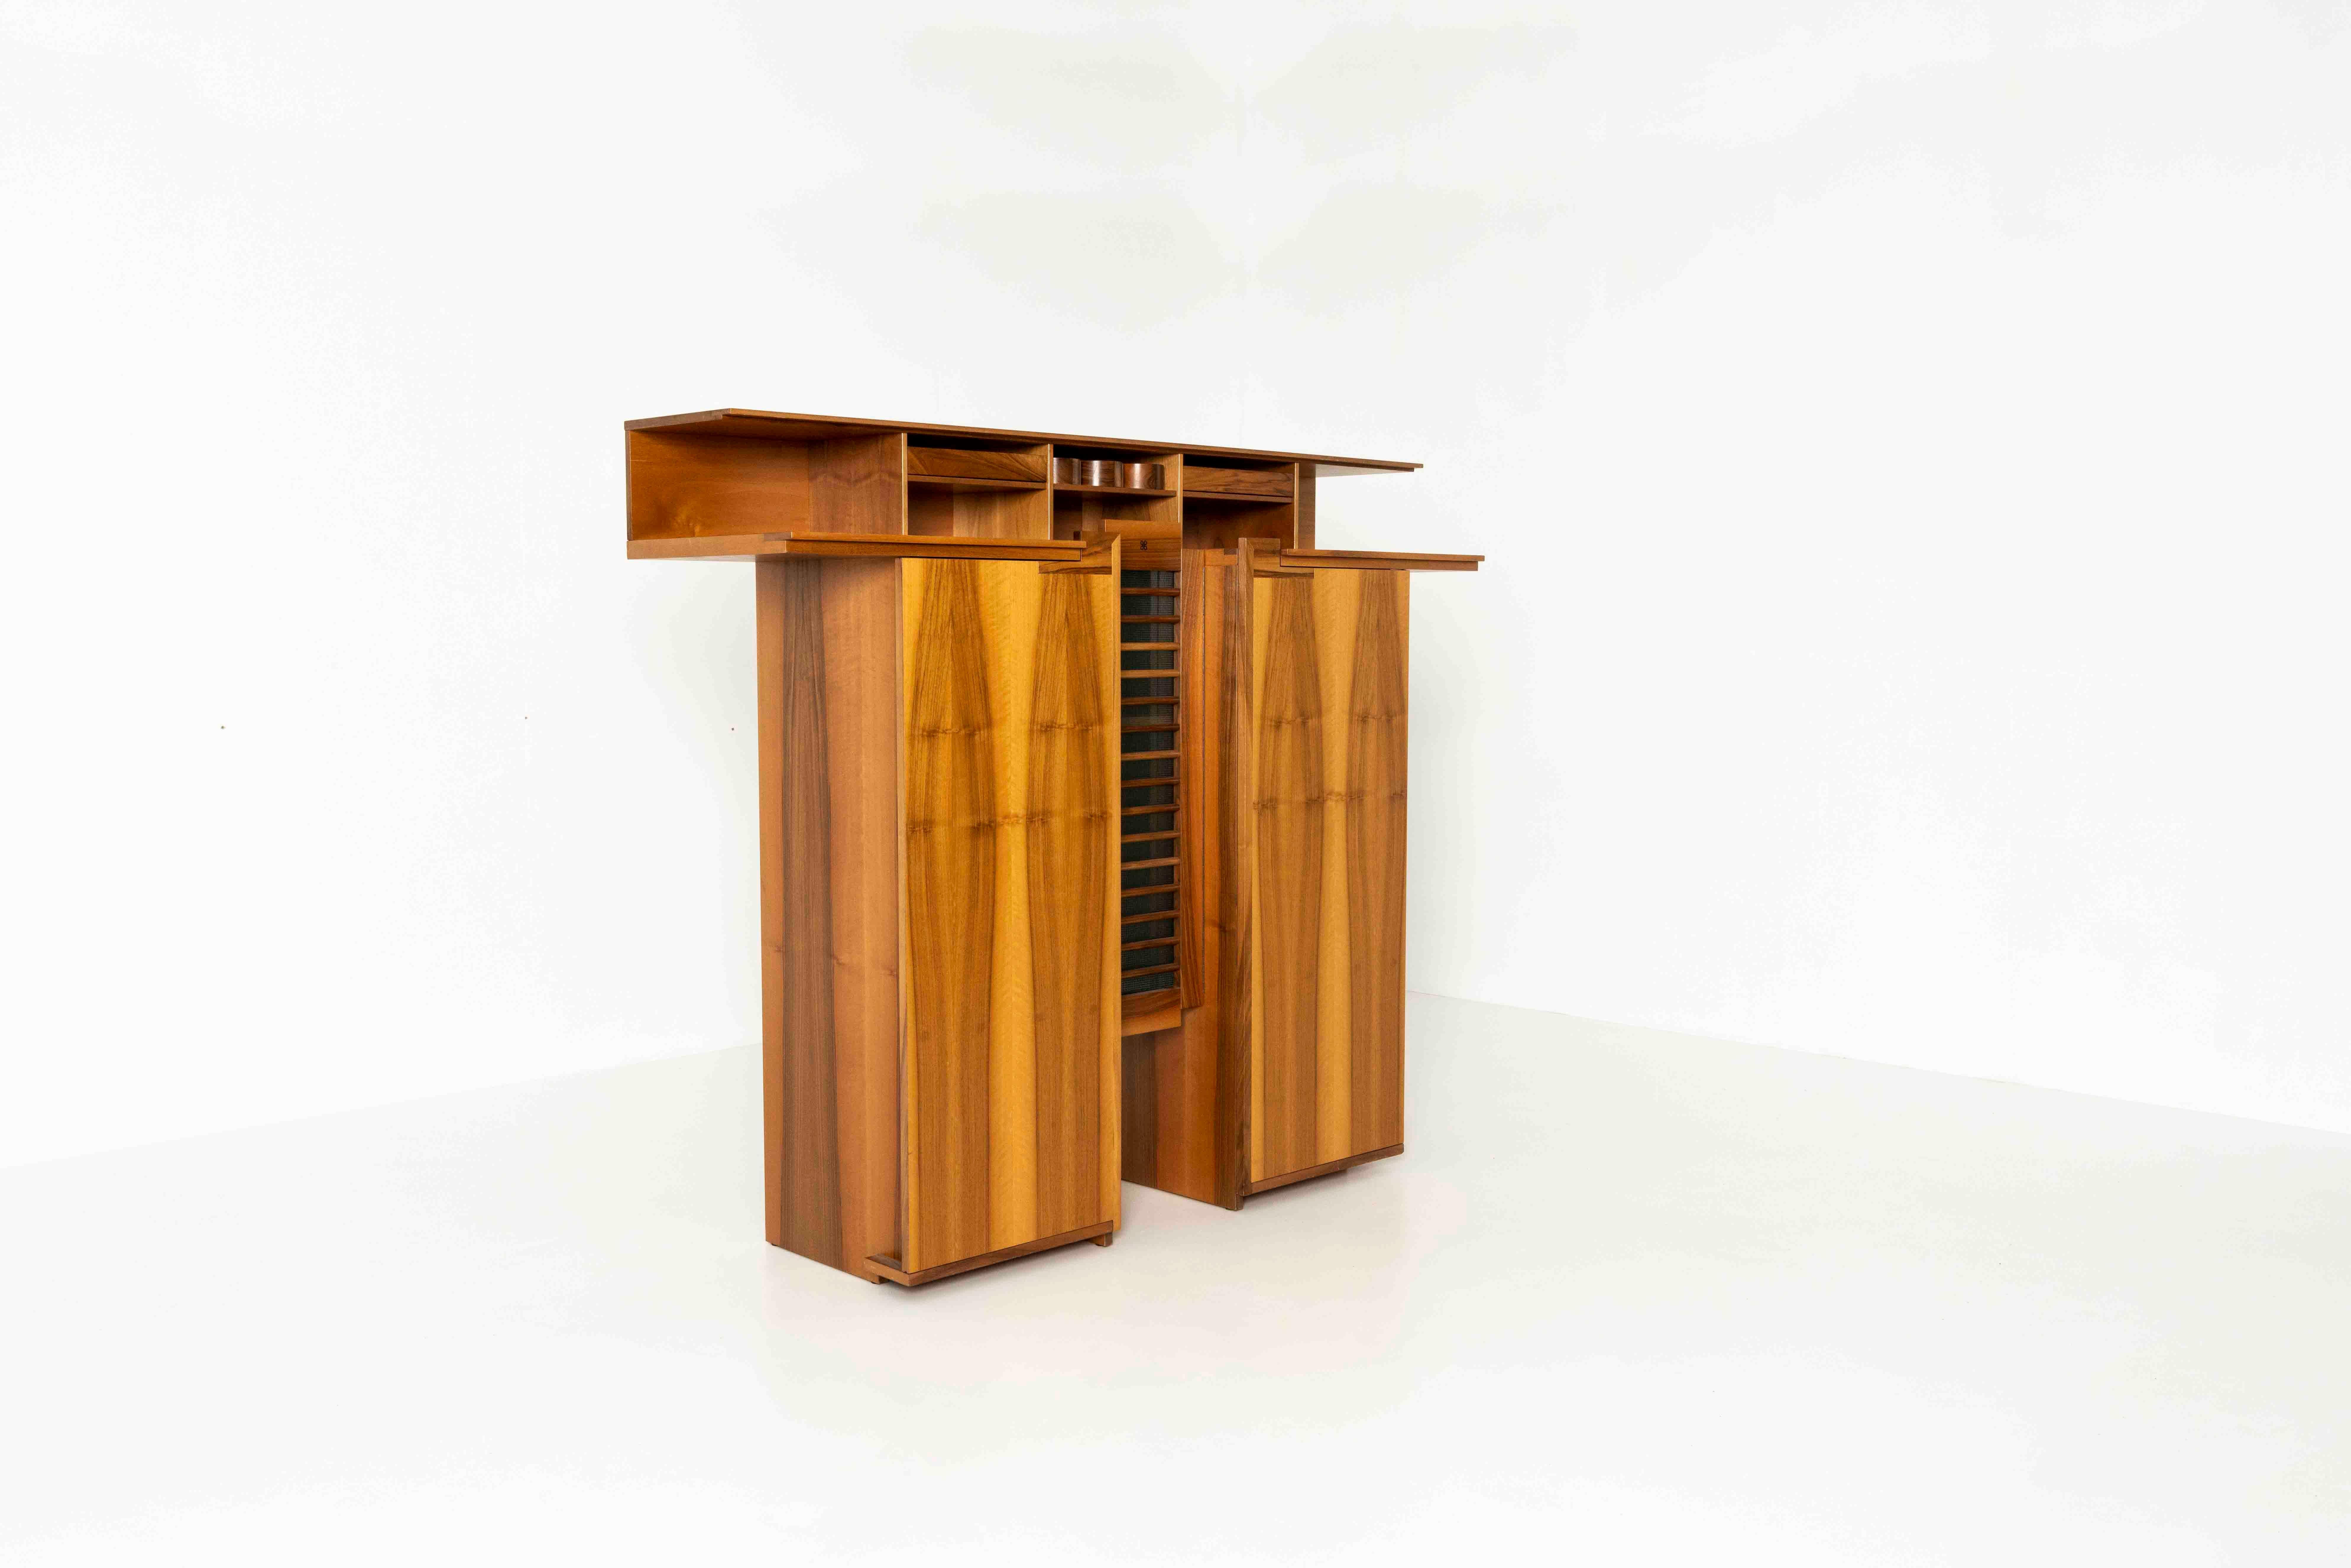 SidebSideboard by Franco Poli from the 'Scaligera' series for Bernini, Italy 1970s. This sideboard, in walnut wood and glass, is one of the favorites of our collection. It is clearly marked with the Bernini logo in the middle of the sideboard. It